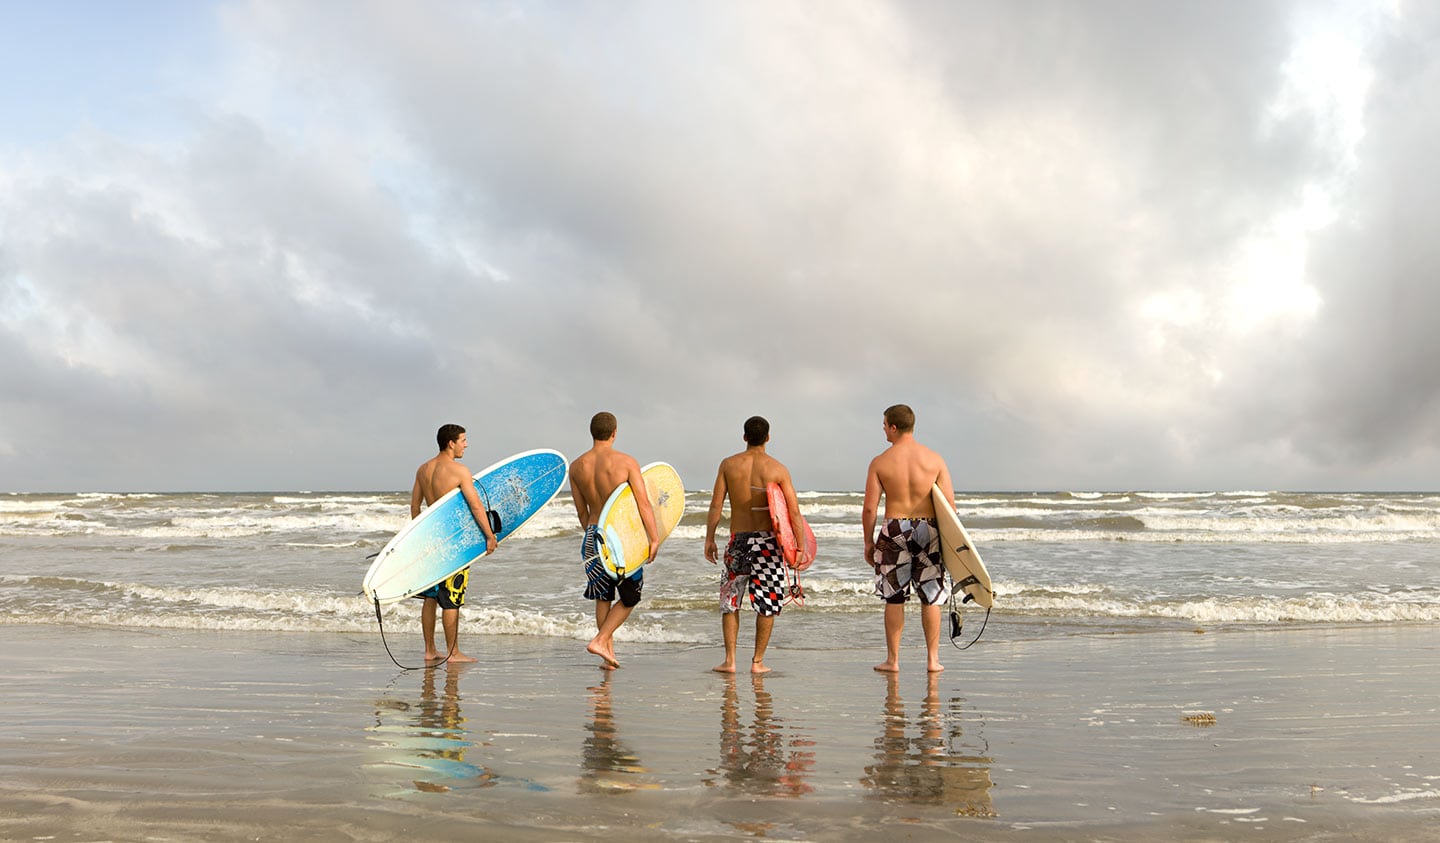 Back Image Four Men Entering Water With Surfboards Cloudy Beach